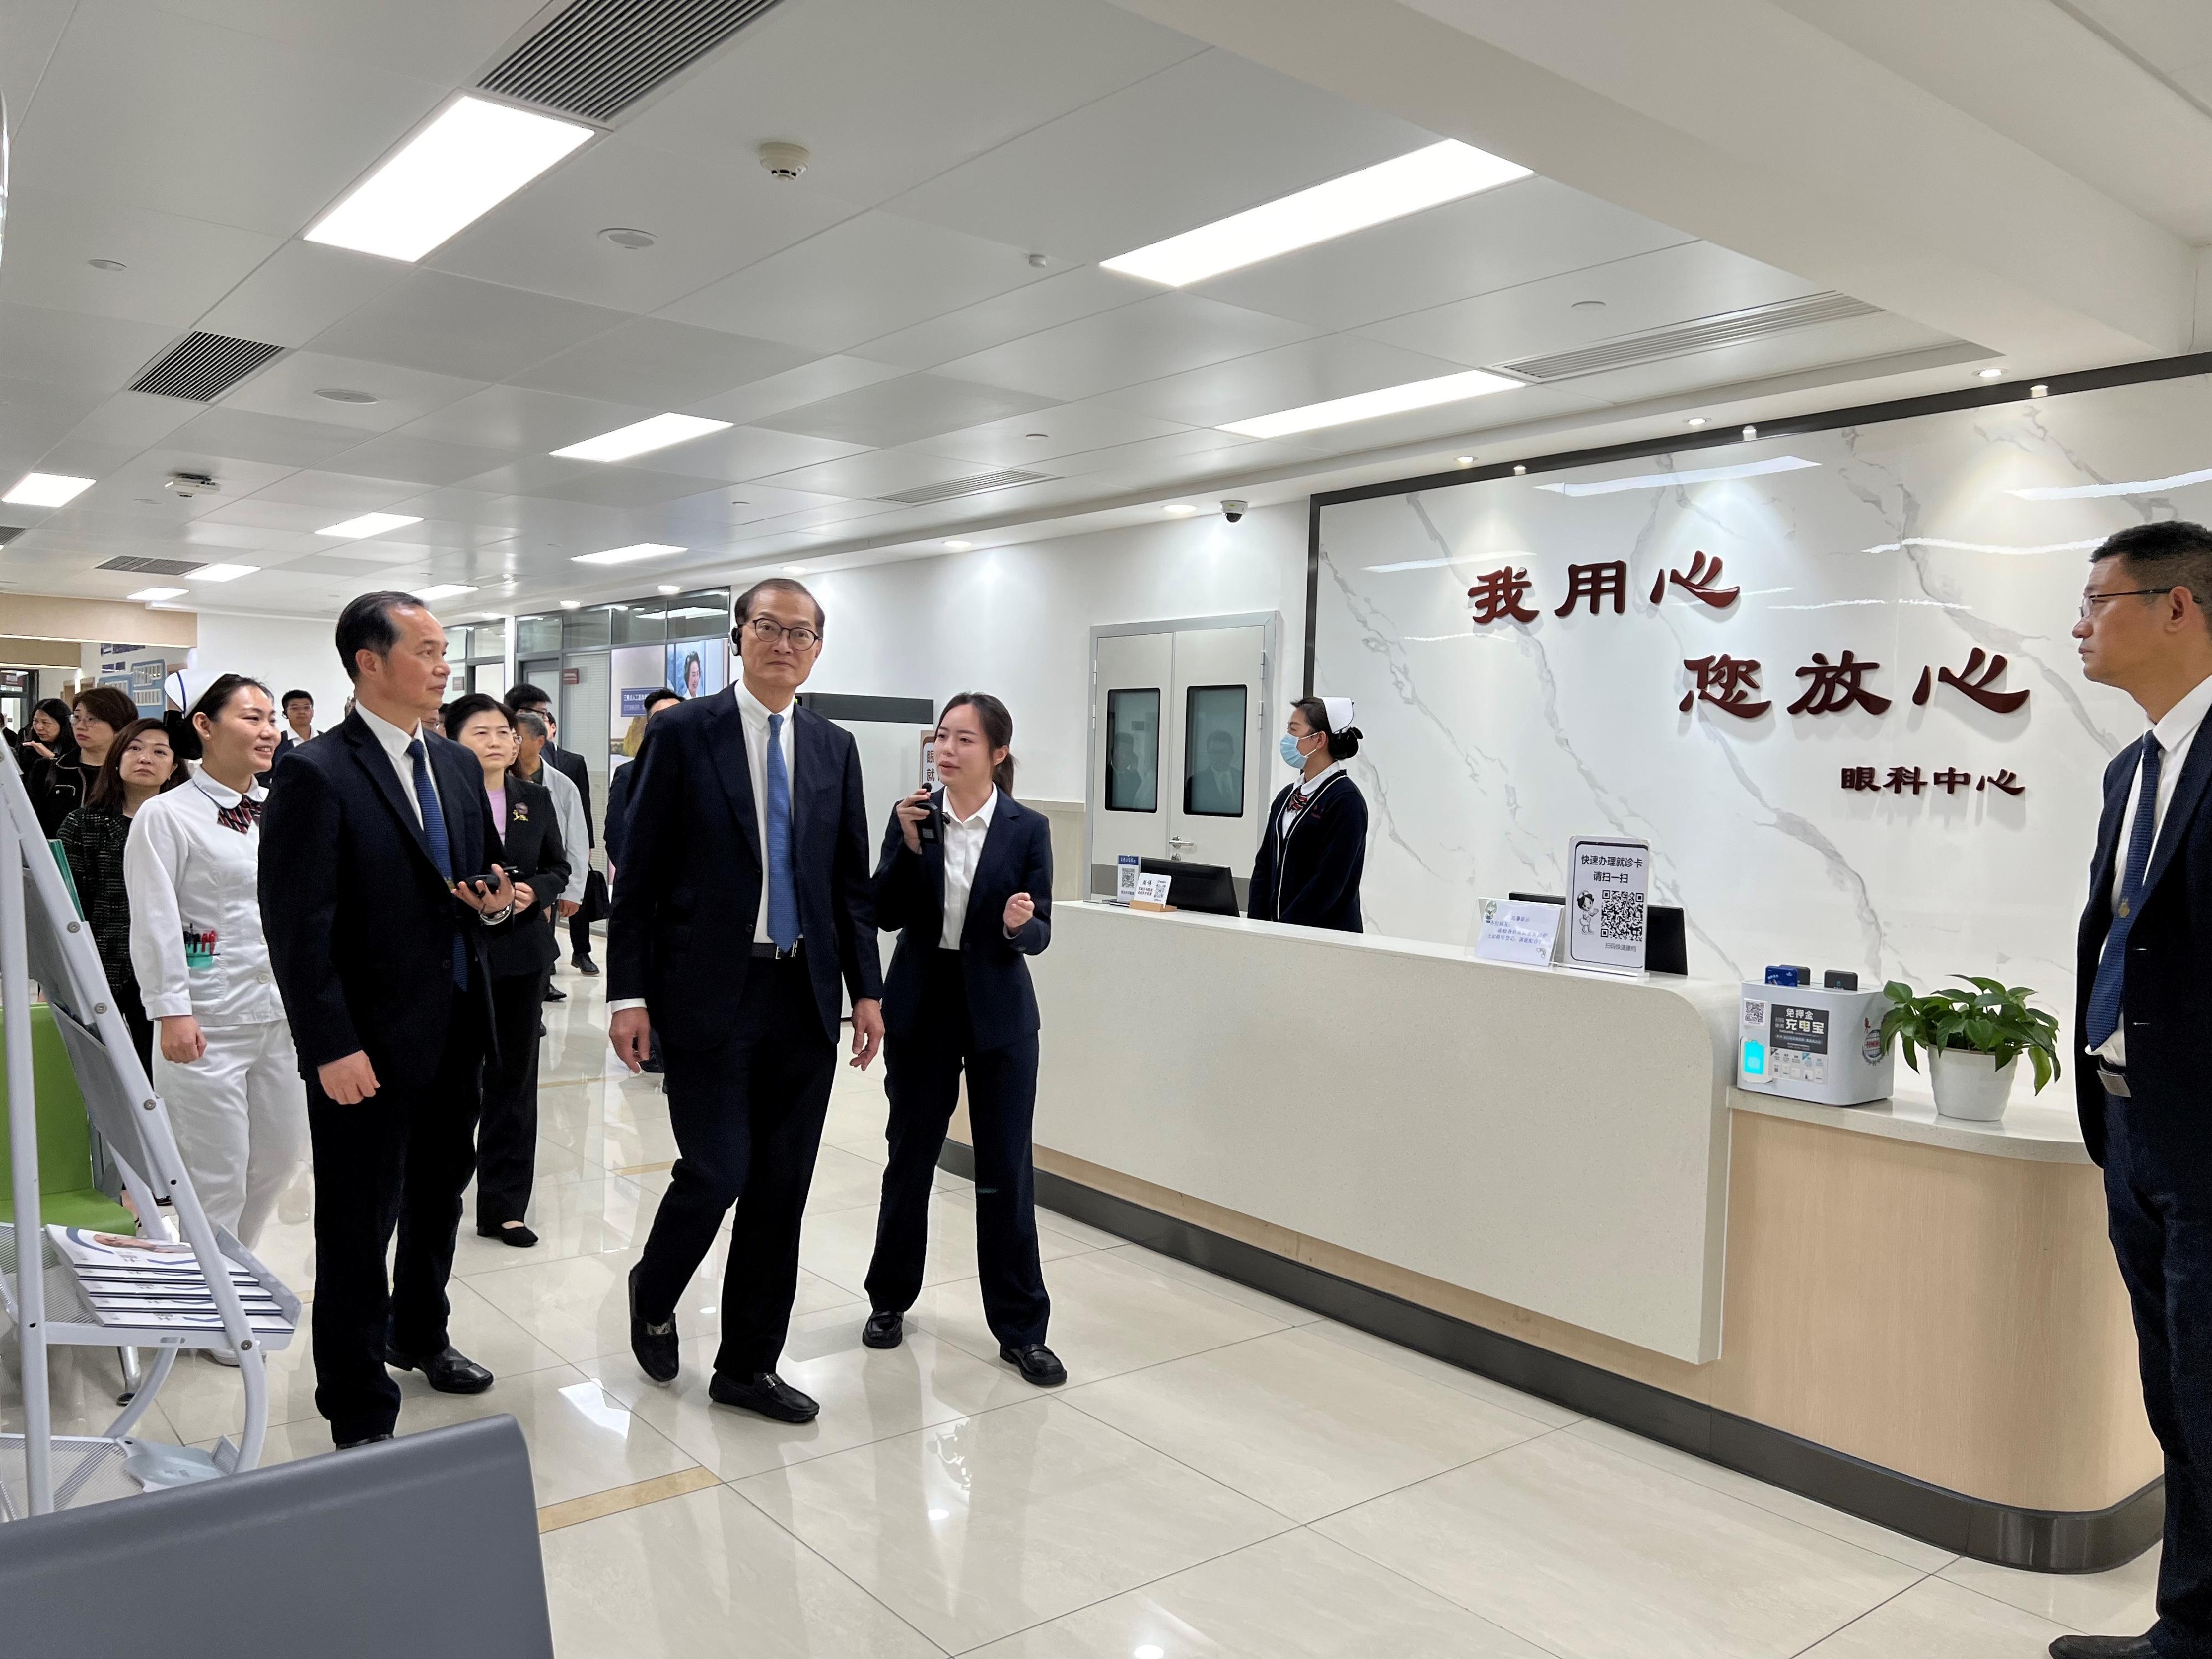 The Secretary for Health, Professor Lo Chung-mau, and his delegation visited the Dongguan Tungwah Hospital in Dongguan today (March 14). Photo shows Professor Lo (second left) receiving a briefing by a staff member on the ophthalmology services of that hospital.